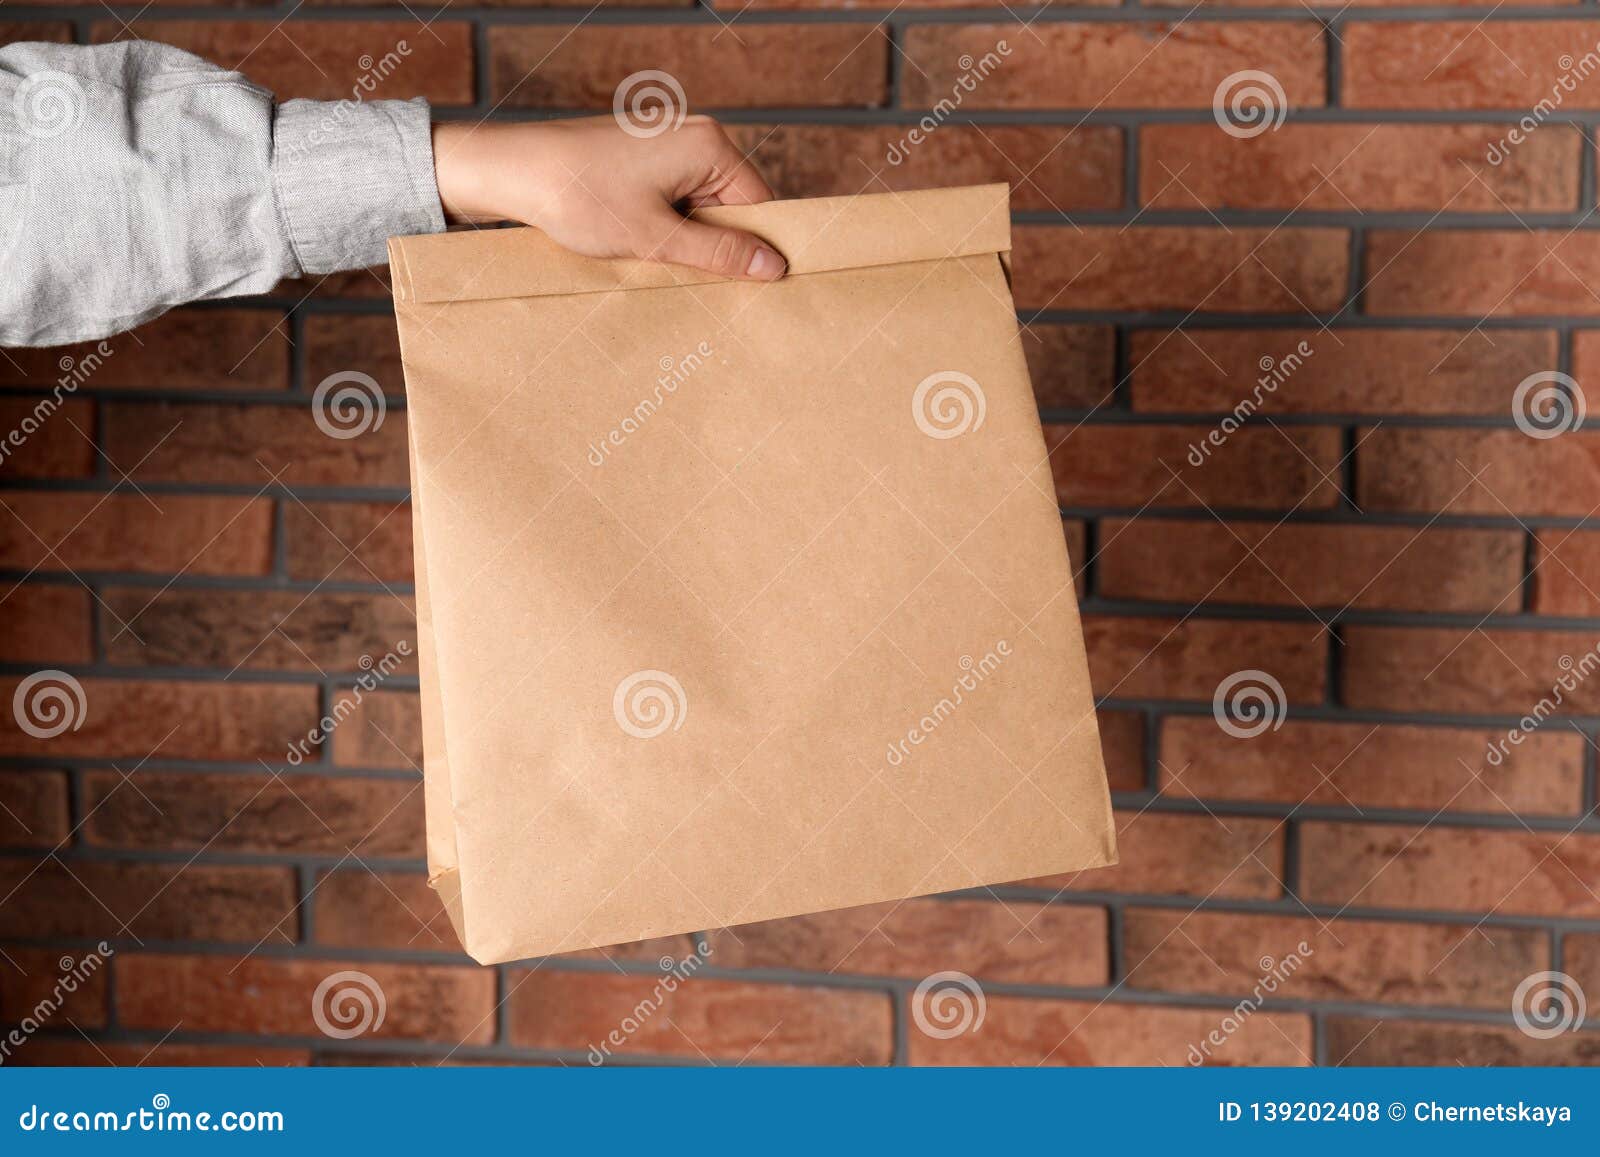 Young Woman With Shopping Bags Standing Against Gray Wall 